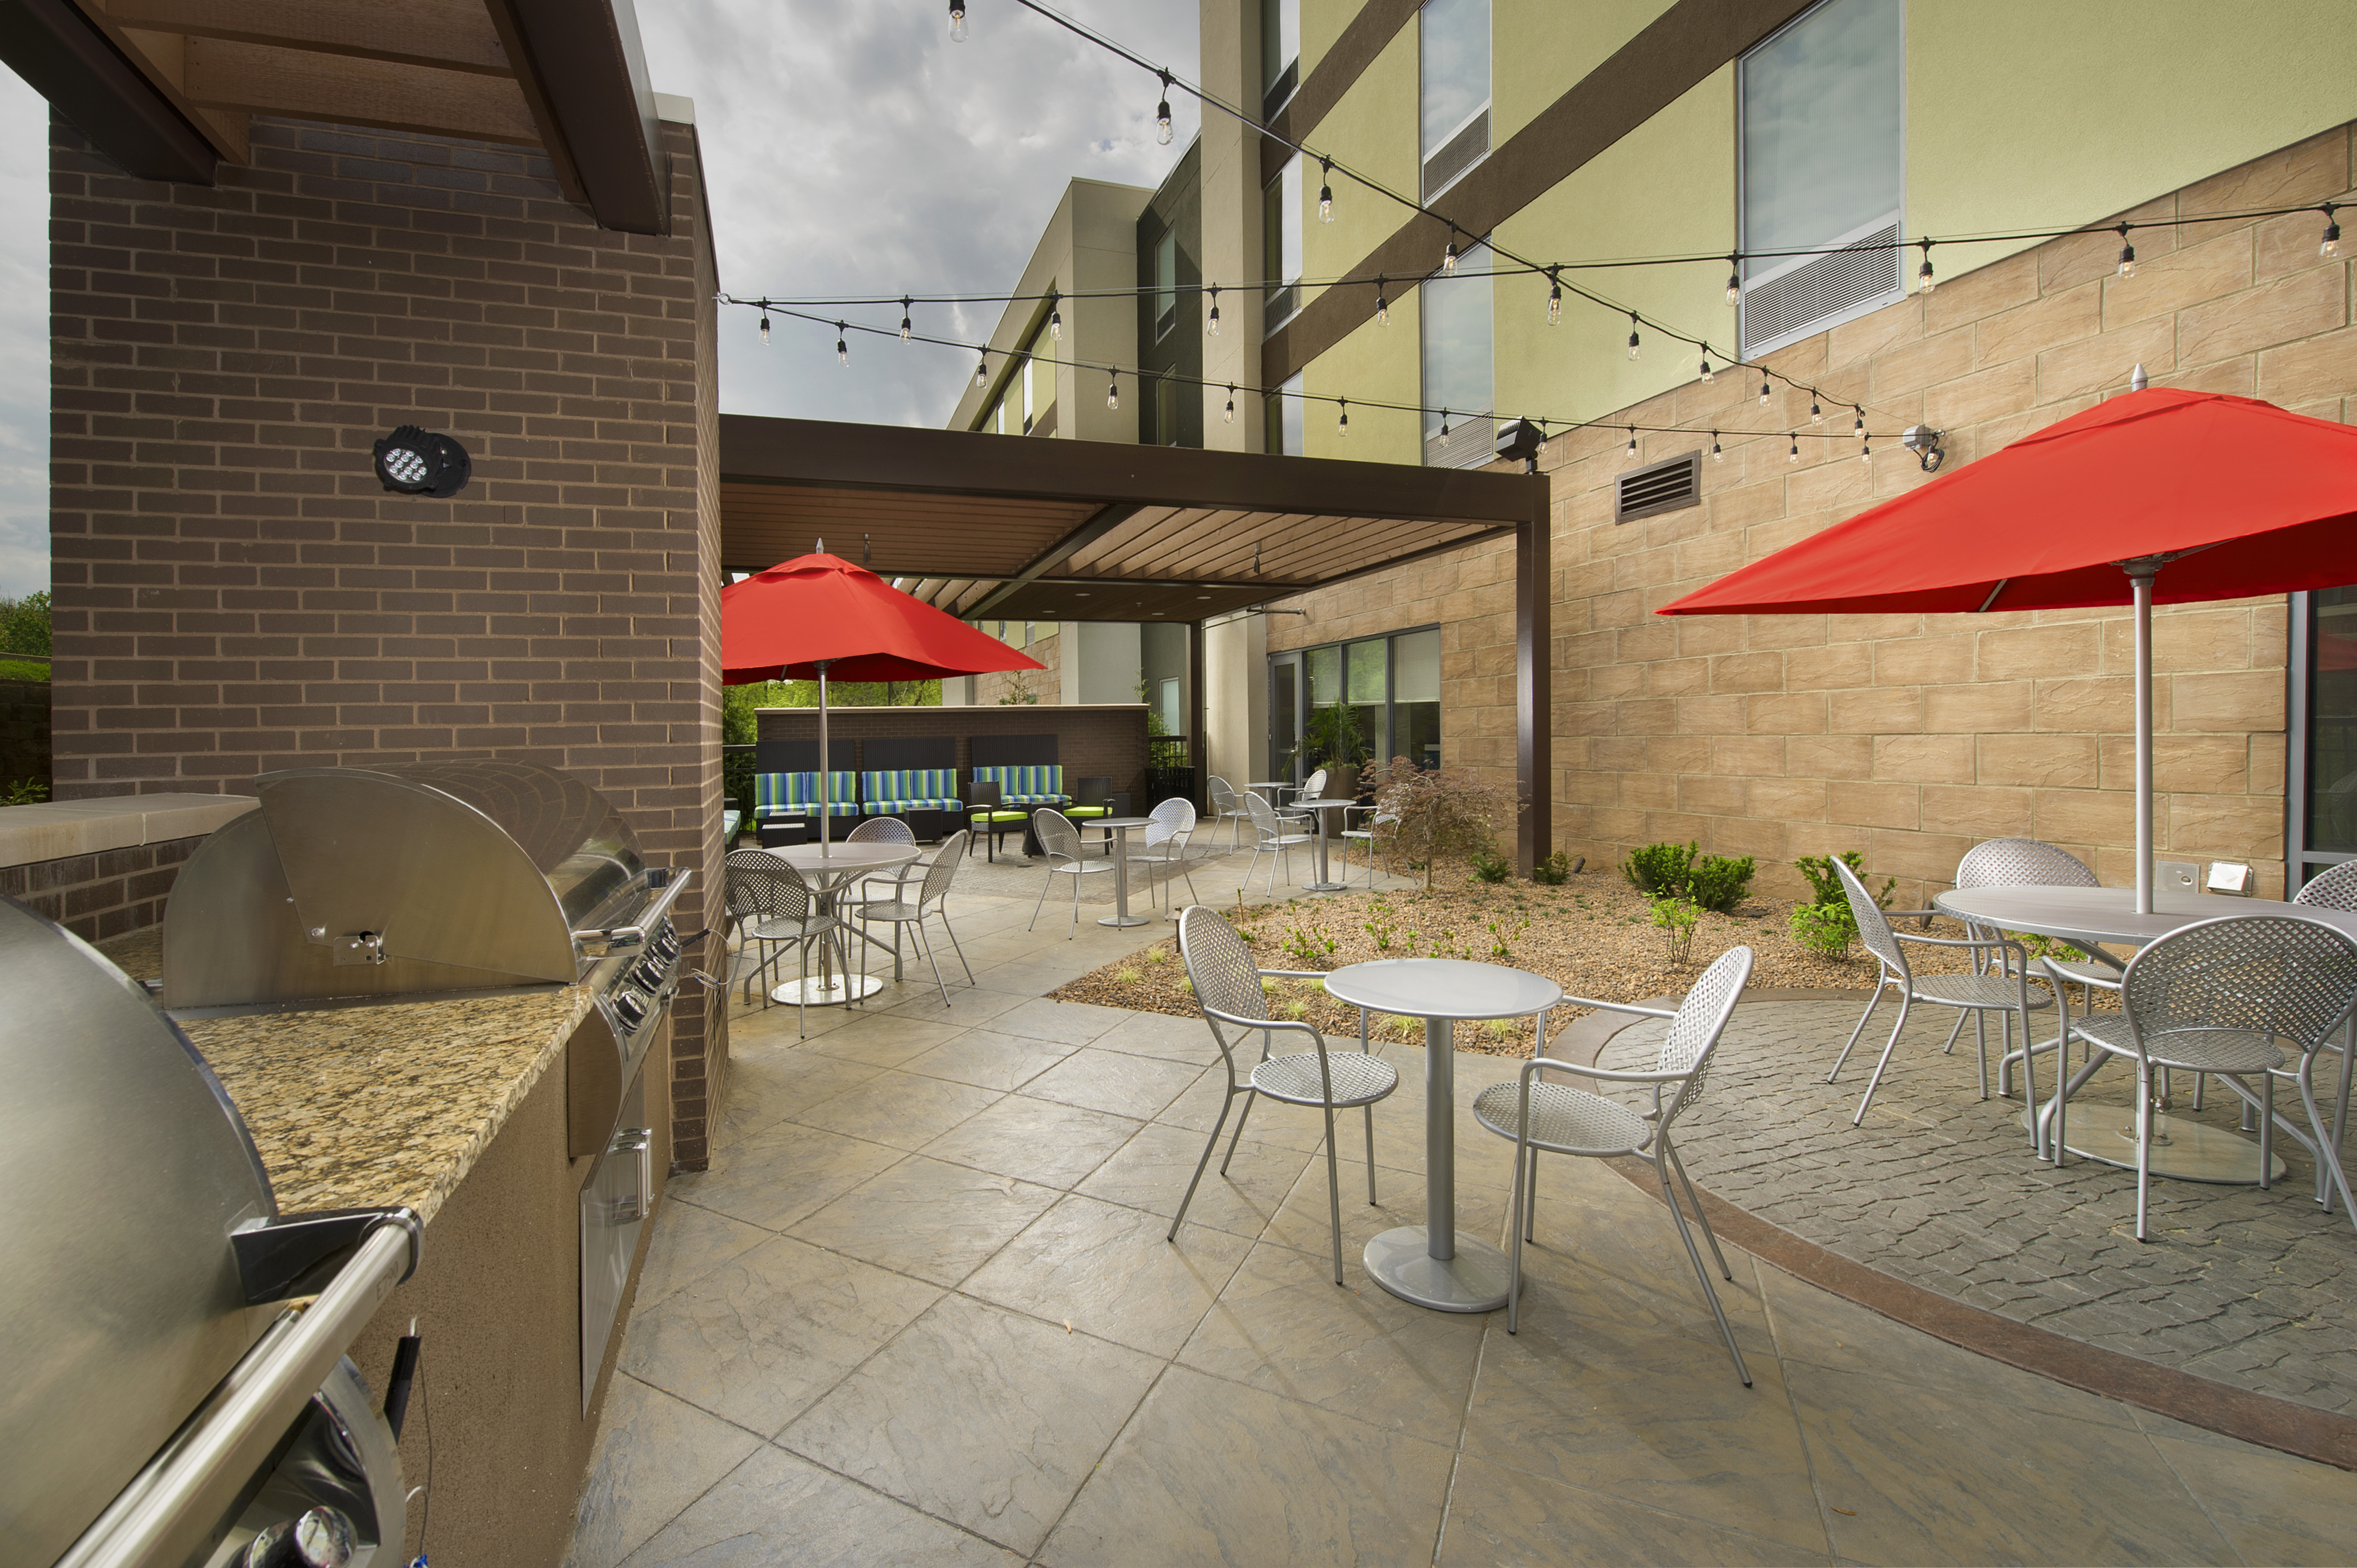 Outdoor Patio Seating Area with Chairs, Tables, Umbrellas and BBQ Grill